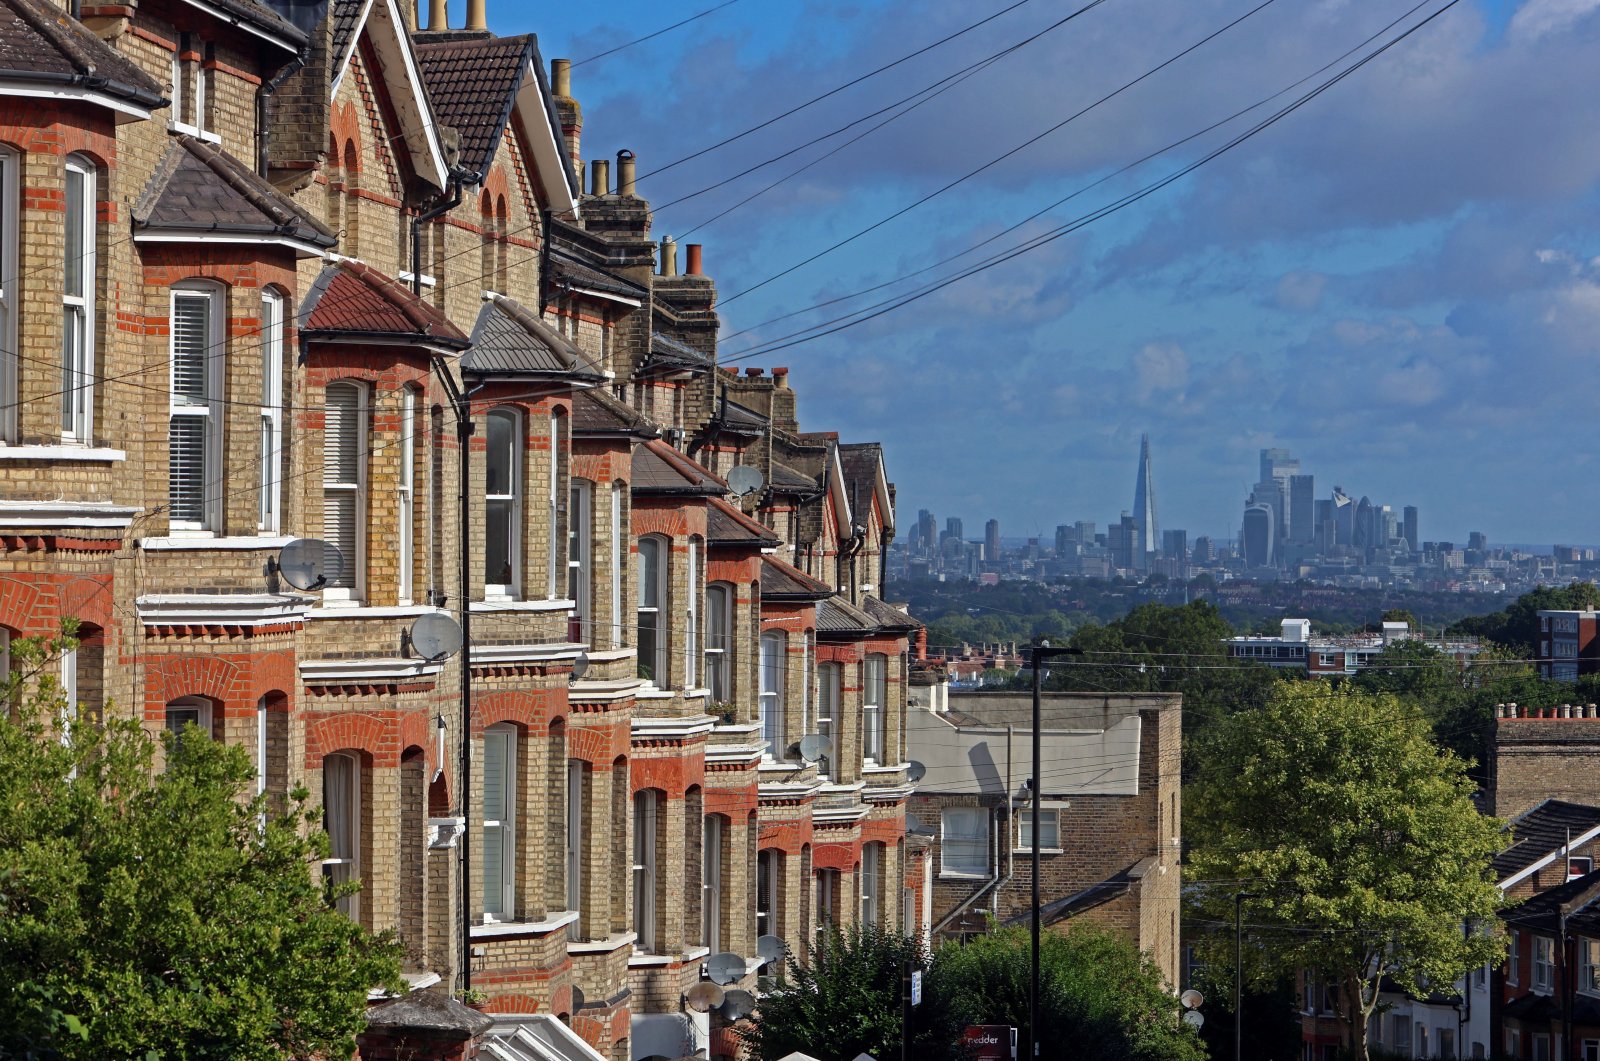 UK house prices down for 4th month but market shows resilience